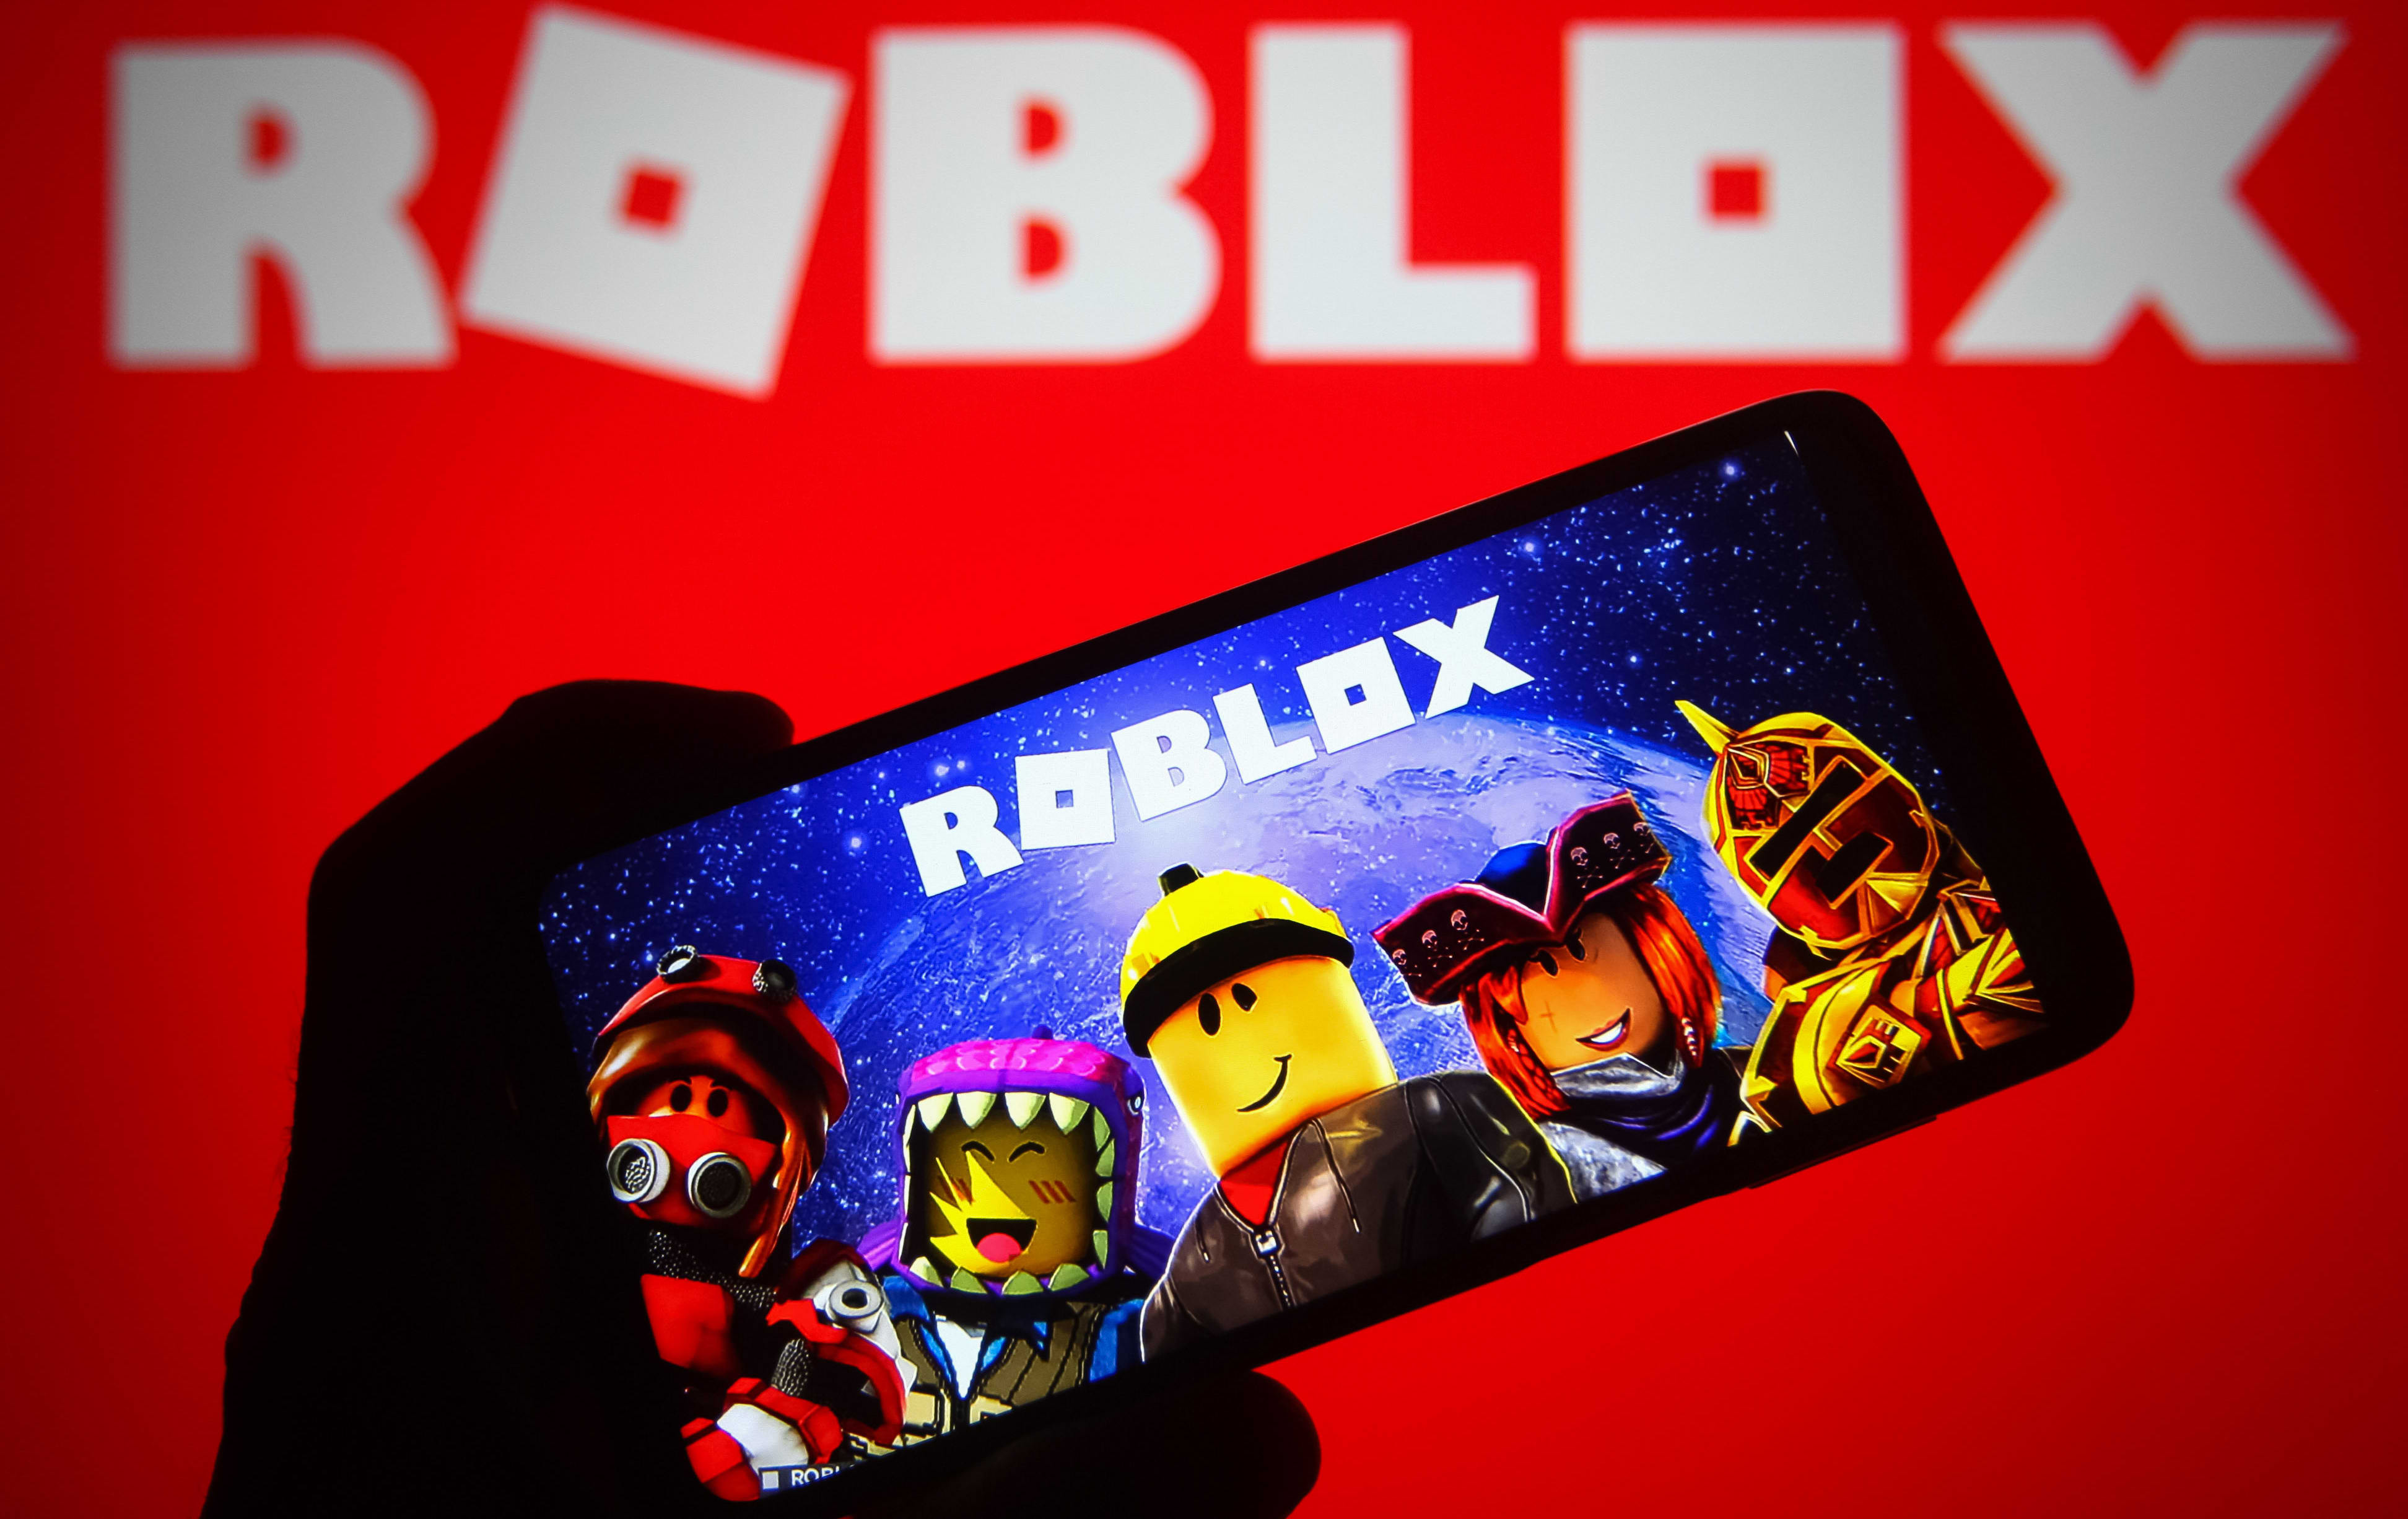 Roblox: Excellent Company, But High Valuation 